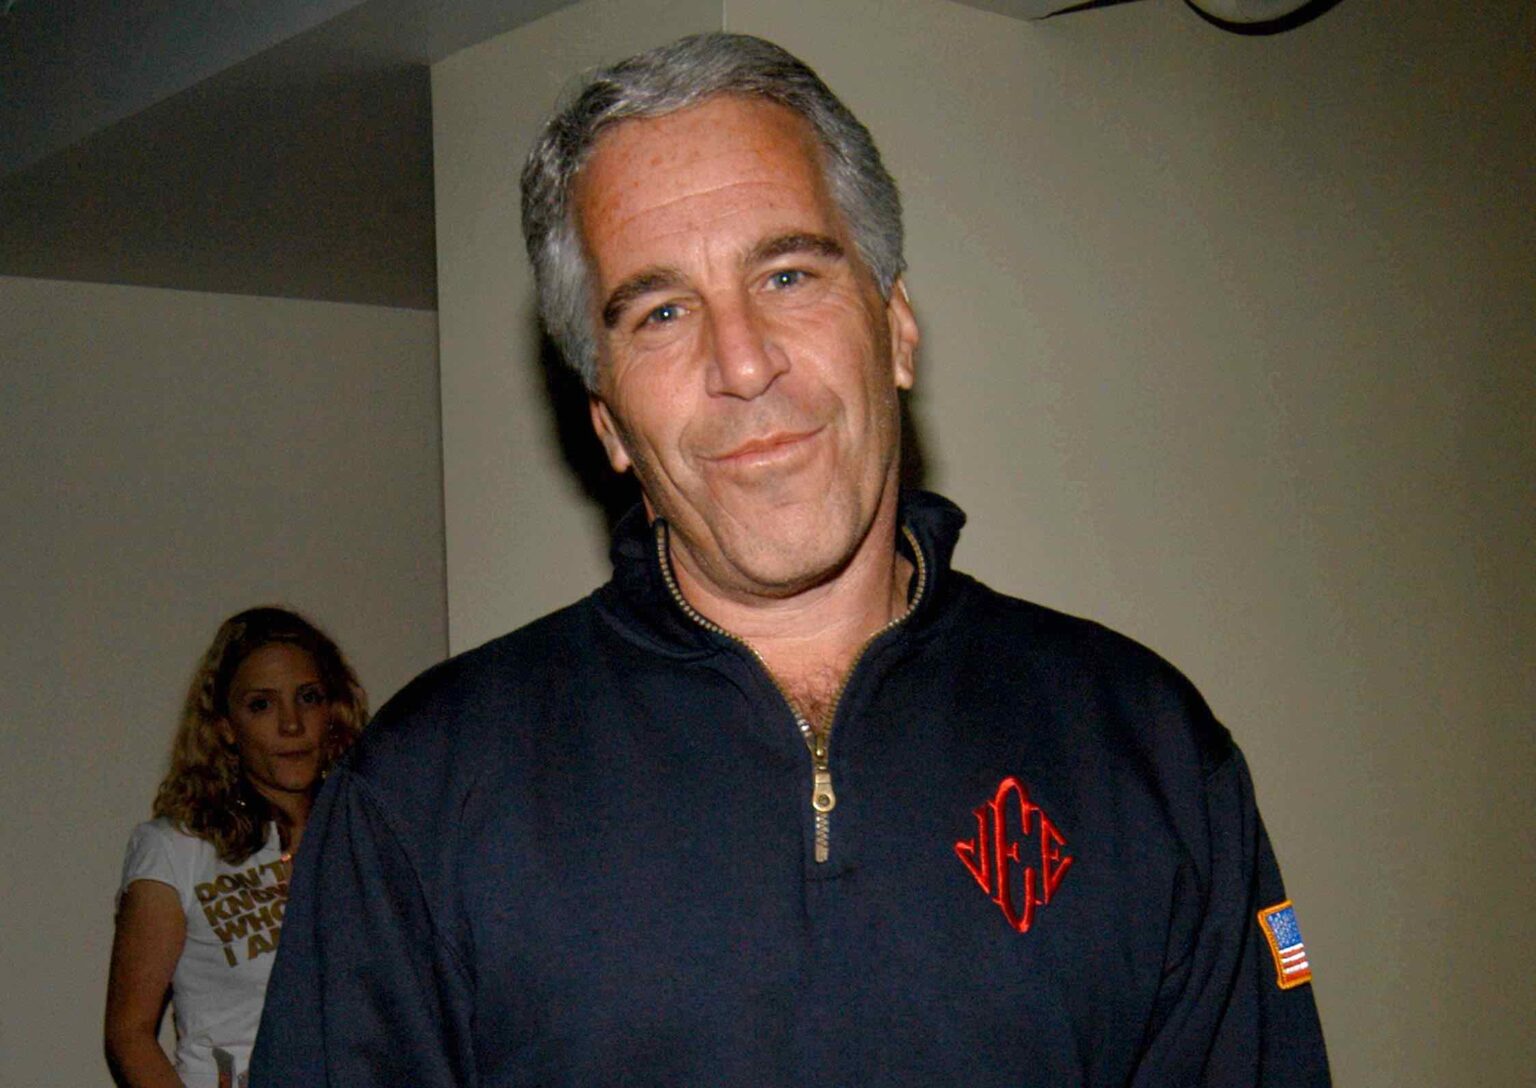 The massive net worth of Jeffrey Epstein didn't all go towards weird paintings and jet fuel. Find out which charities benefited from the Epstein fortune.